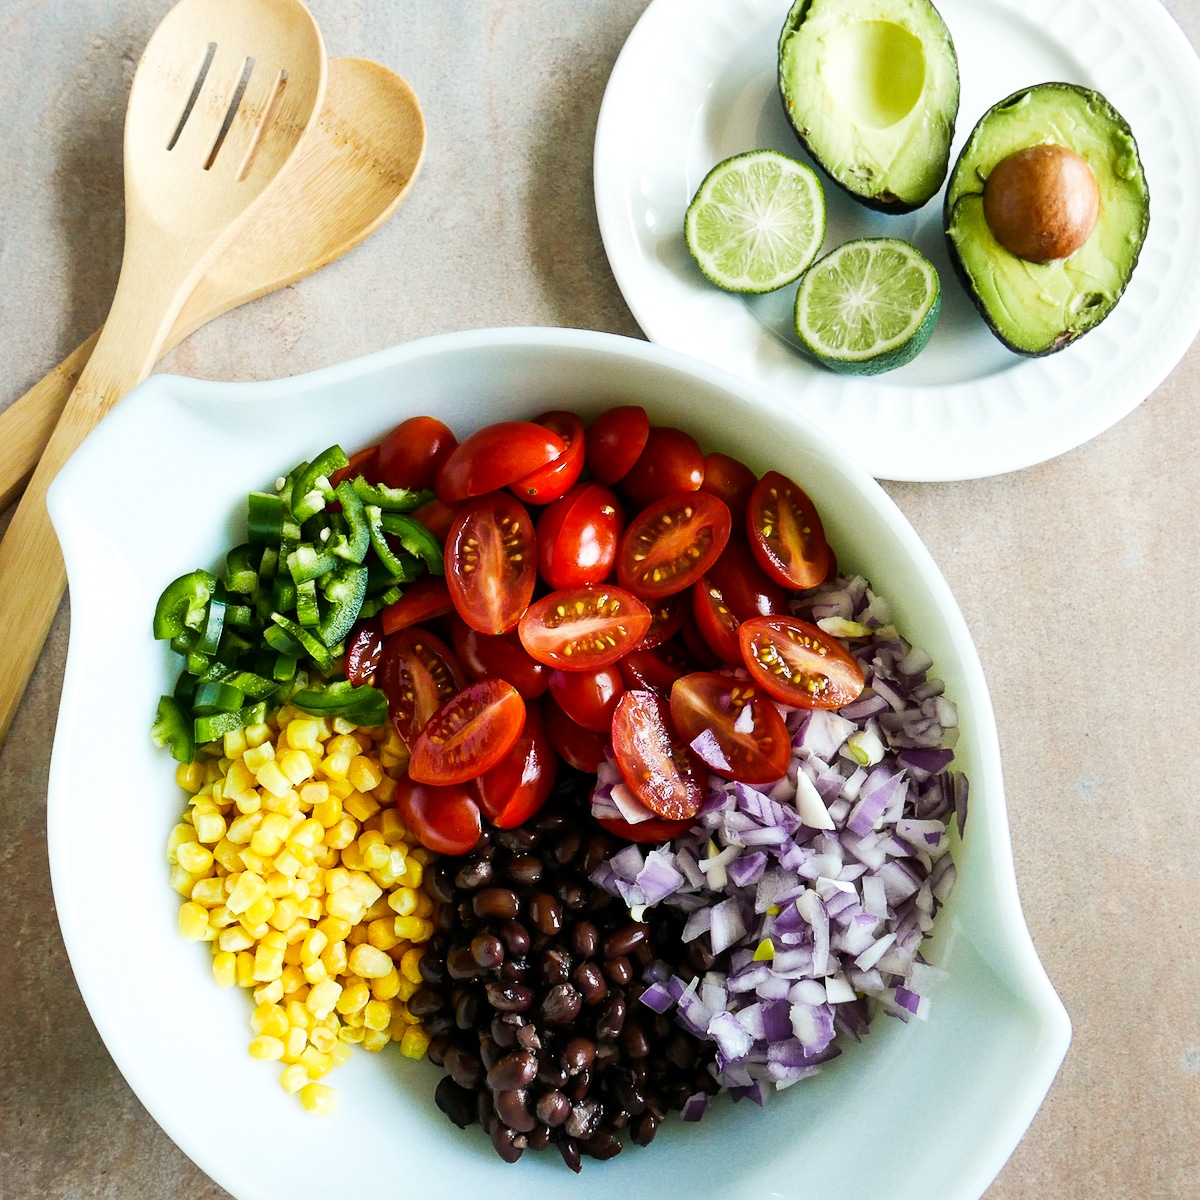 salsa ingredients in a mixing bowl with avocado and cut limes on the side.